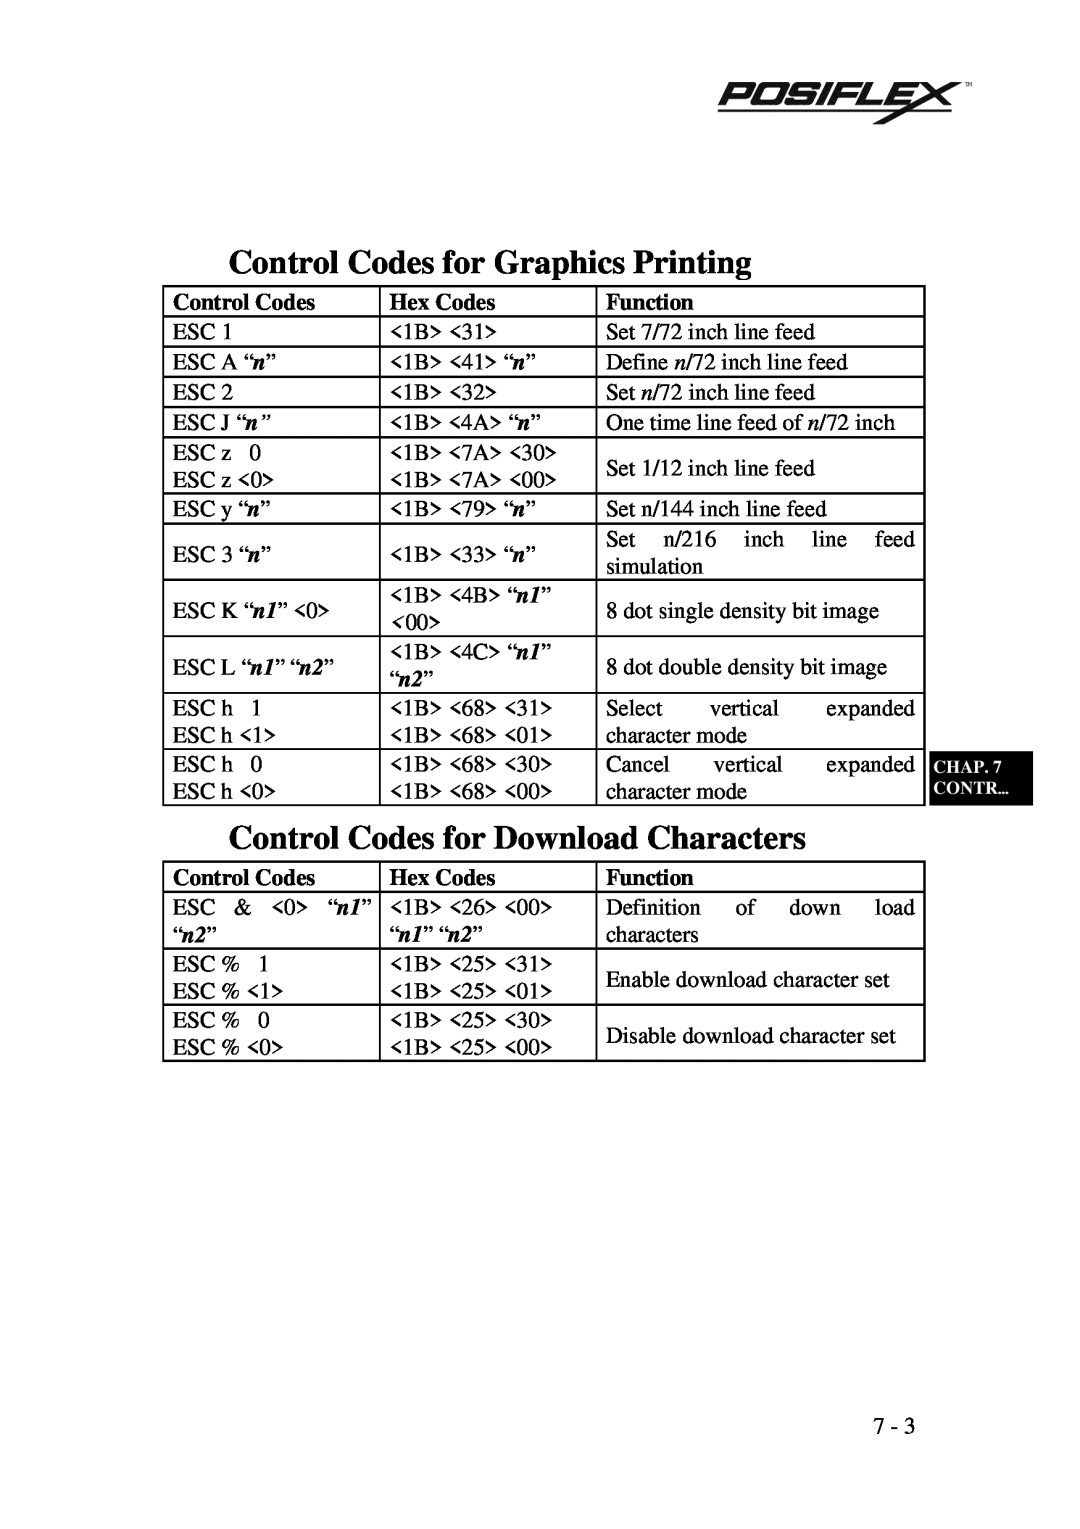 POSIFLEX Business Machines PP3000 Control Codes for Graphics Printing, Control Codes for Download Characters, Hex Codes 